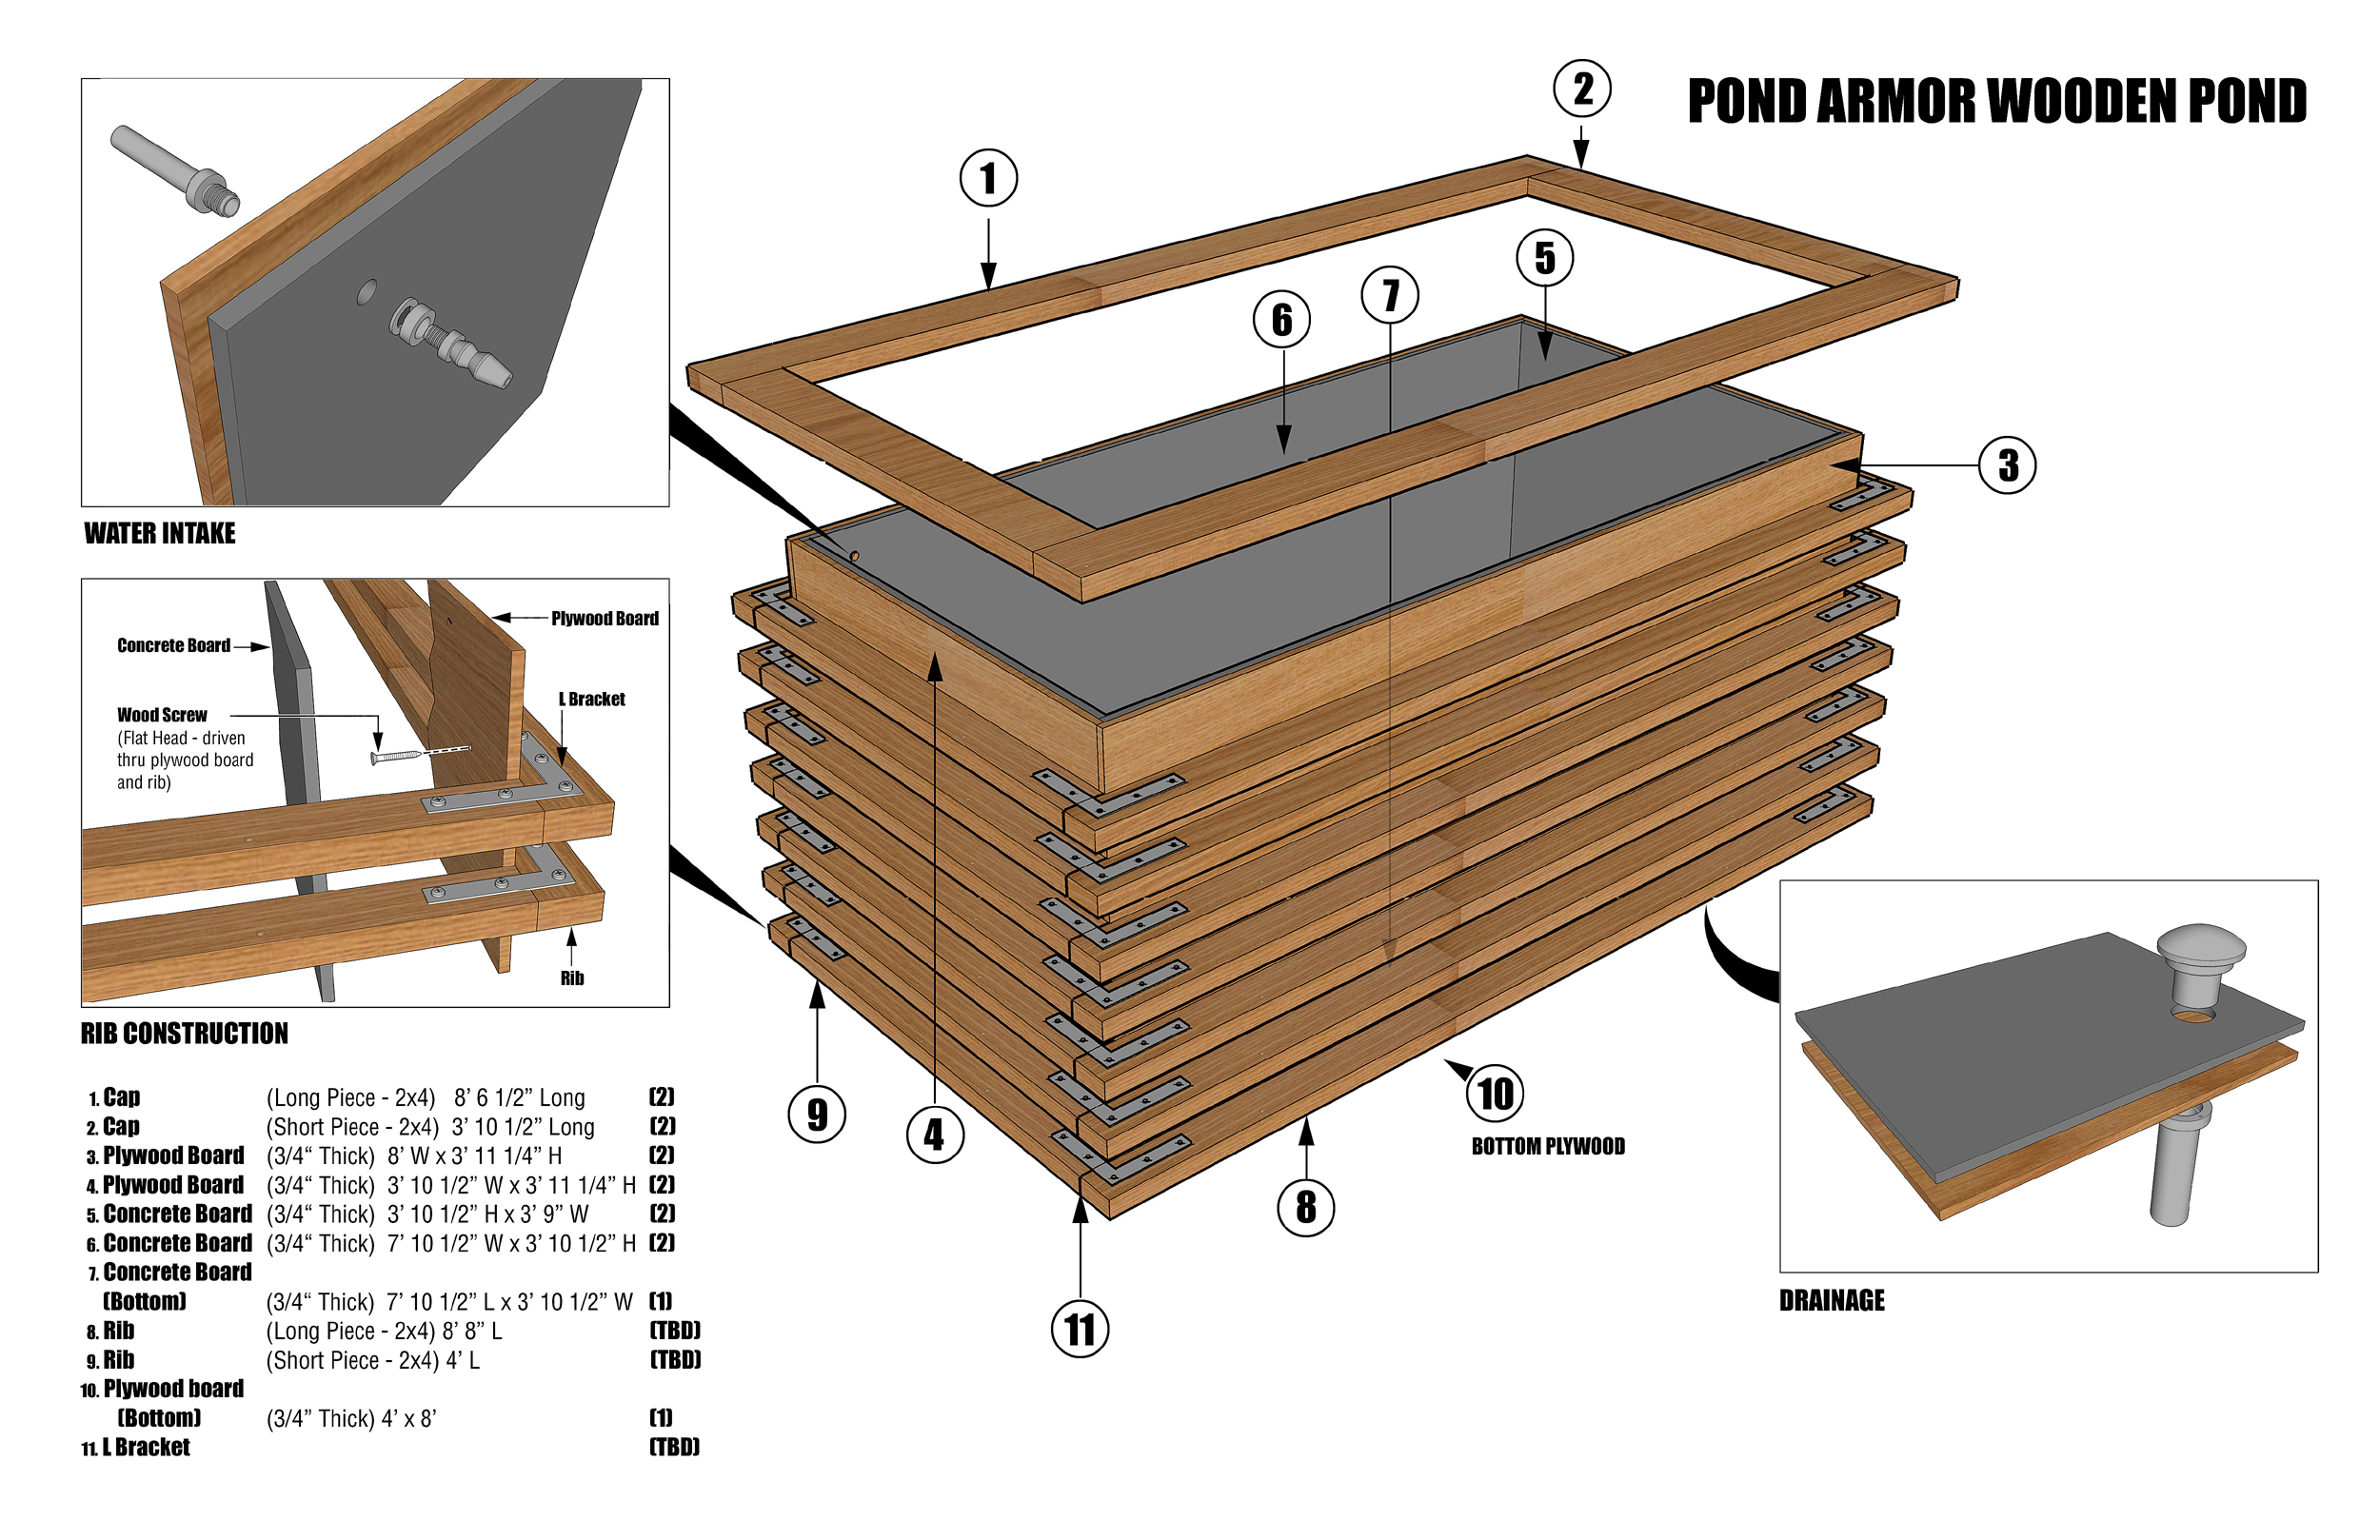 Build a Wooden Raised Pond